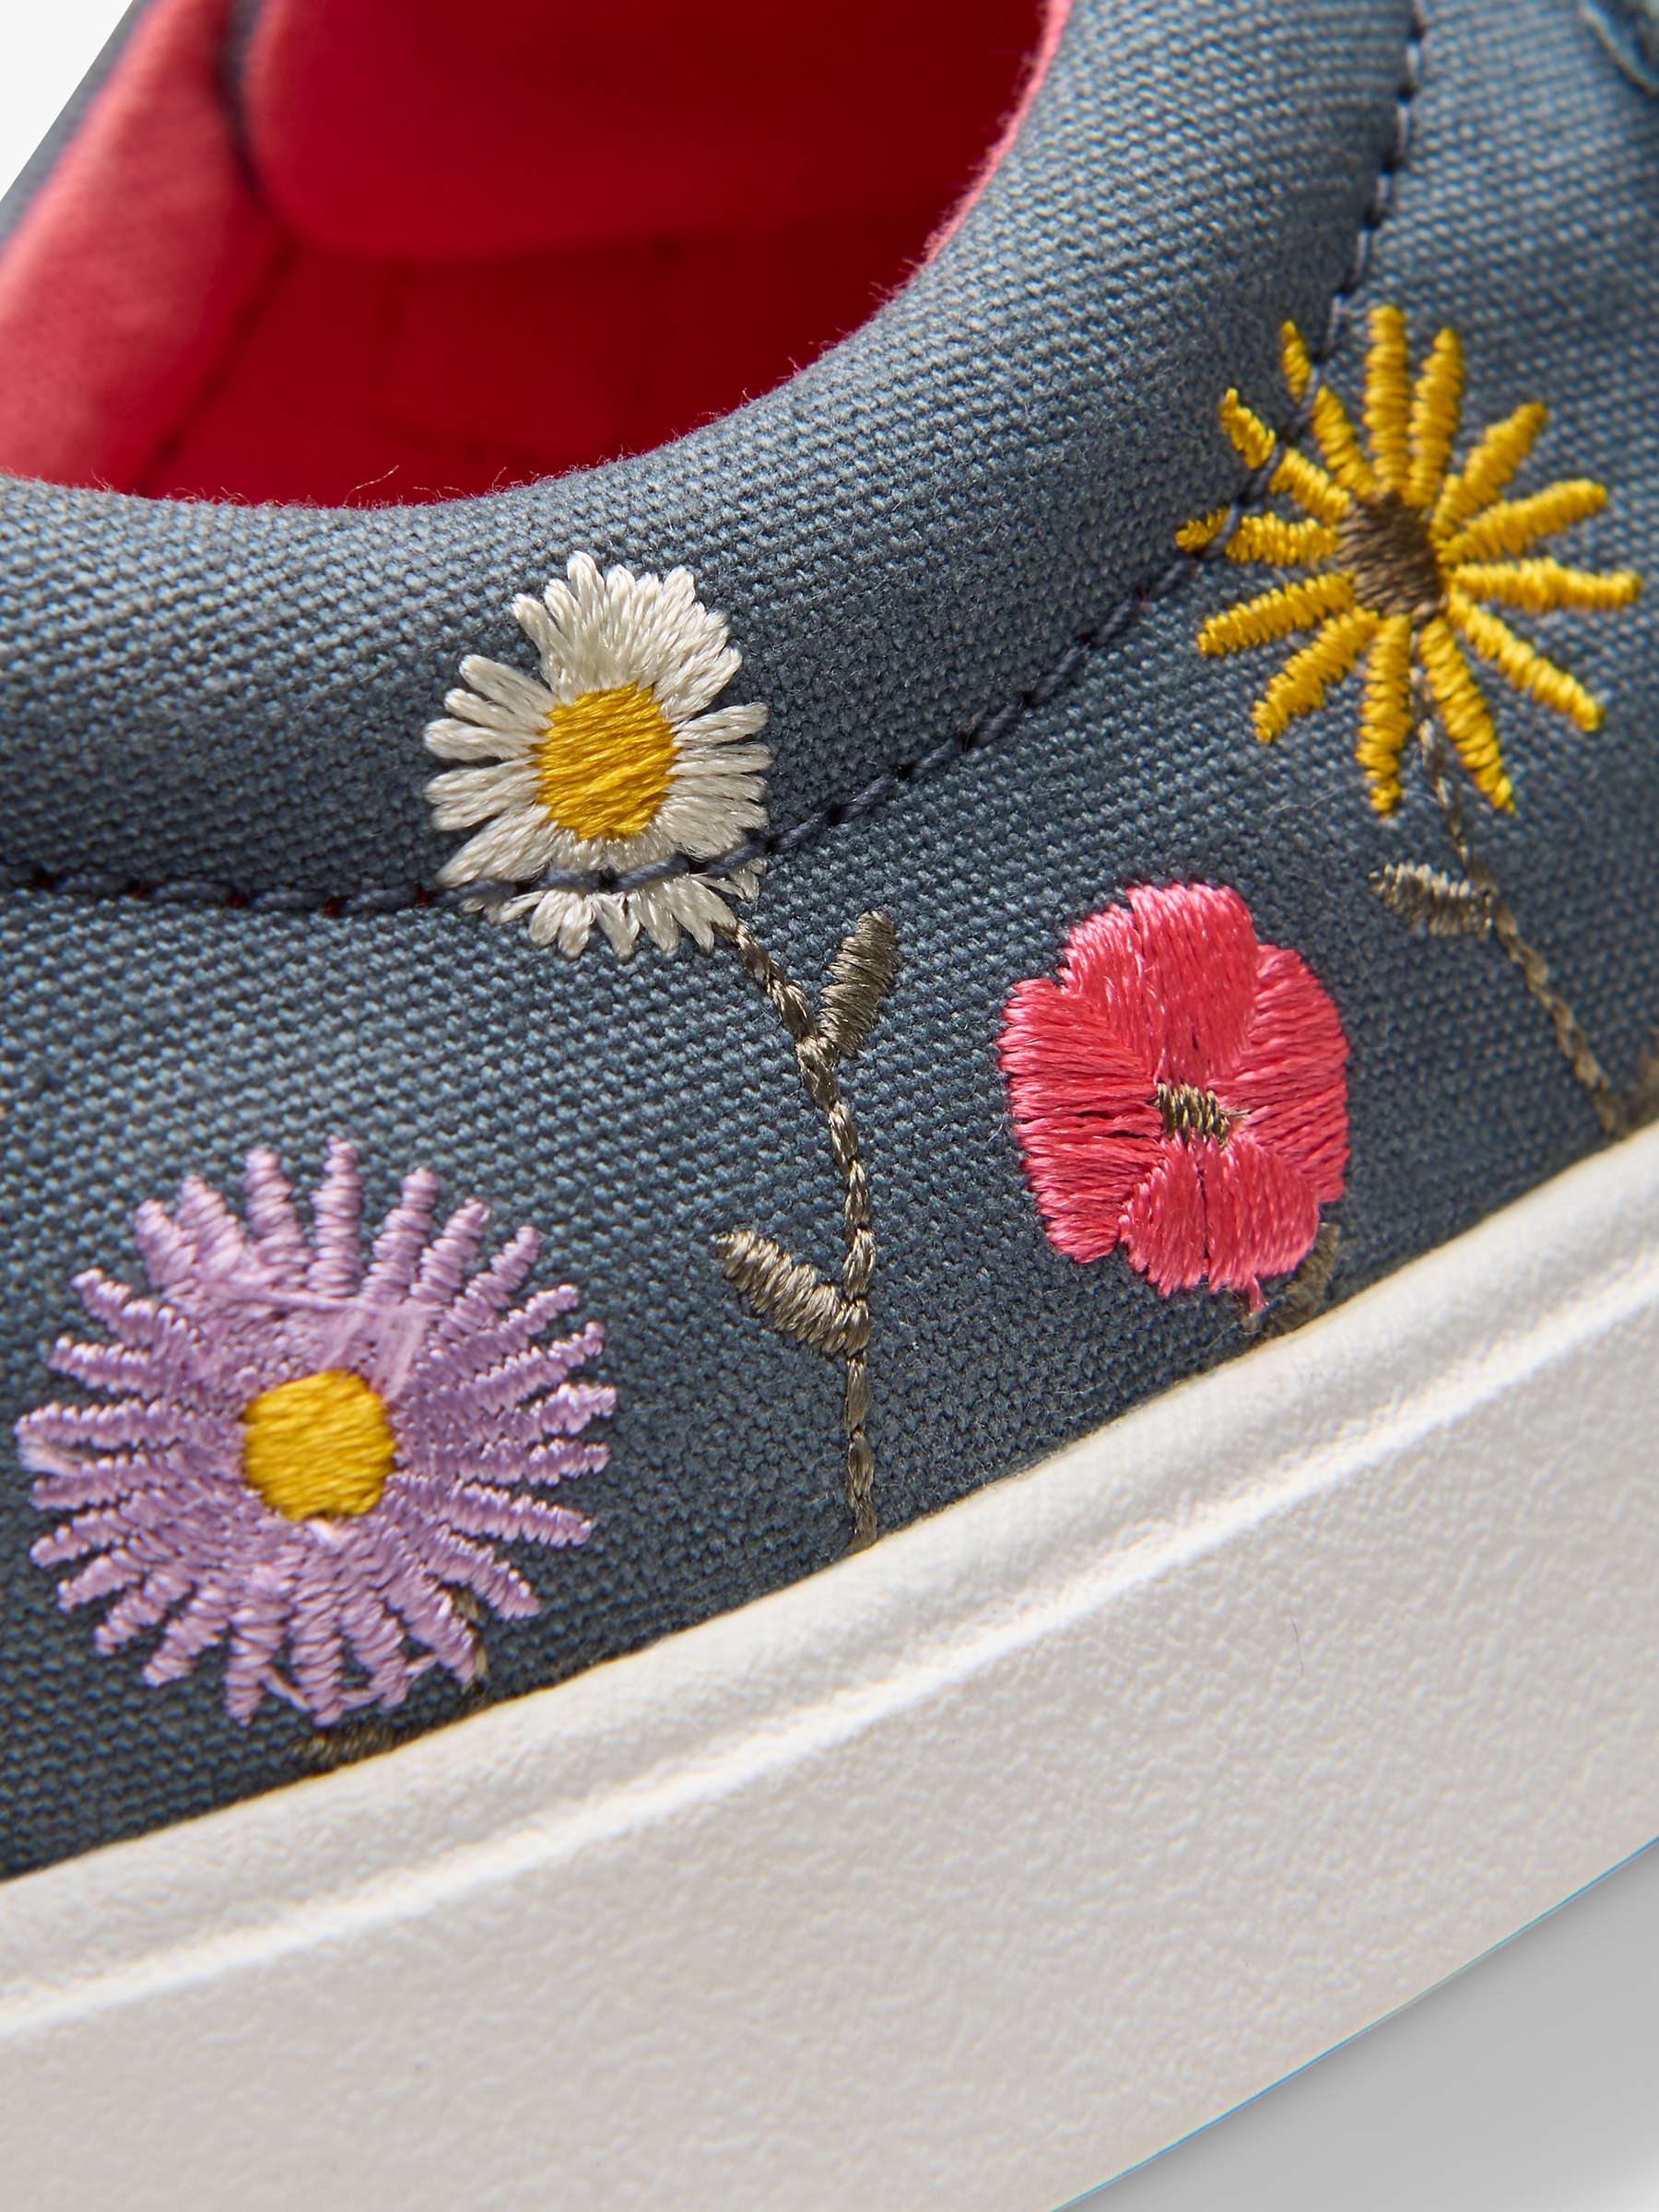 Buy Clarks Kids' City Vibe K Canvas Floral Embroidered Trainers, Blue Online at johnlewis.com